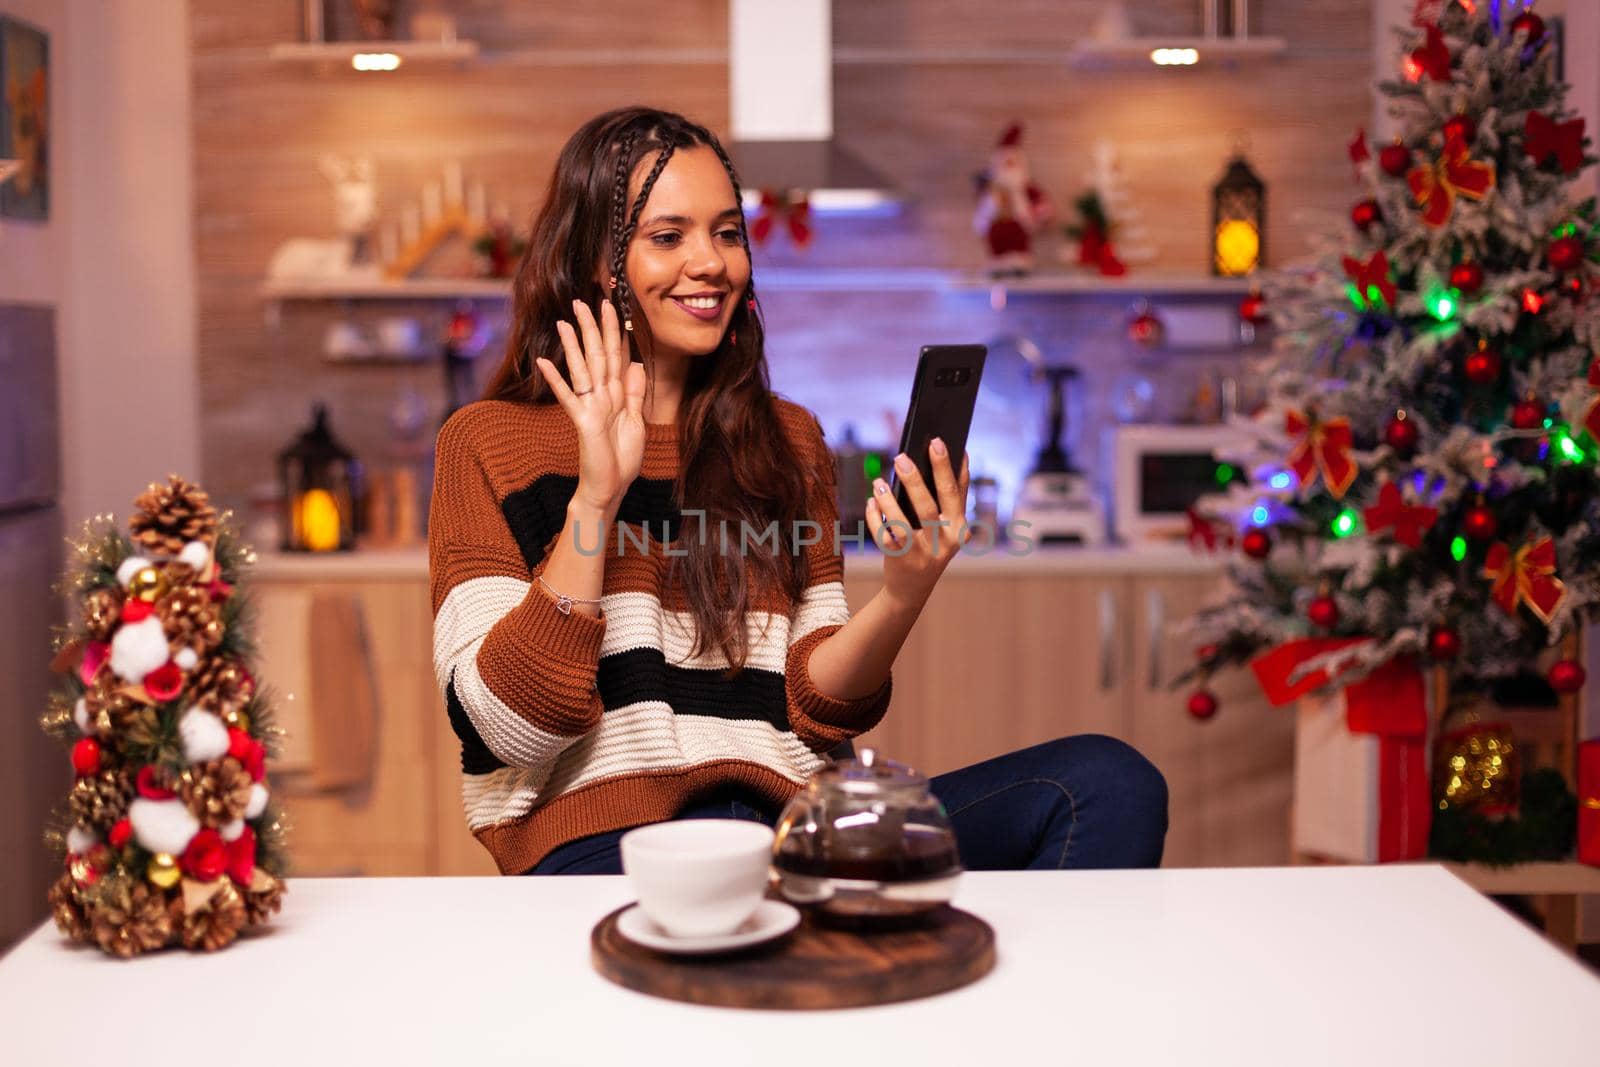 Caucasian woman using video call technology on online internet, holding smartphone and cup of tea in winter decorated kitchen for holiday. Young smiling adult talking to family at home